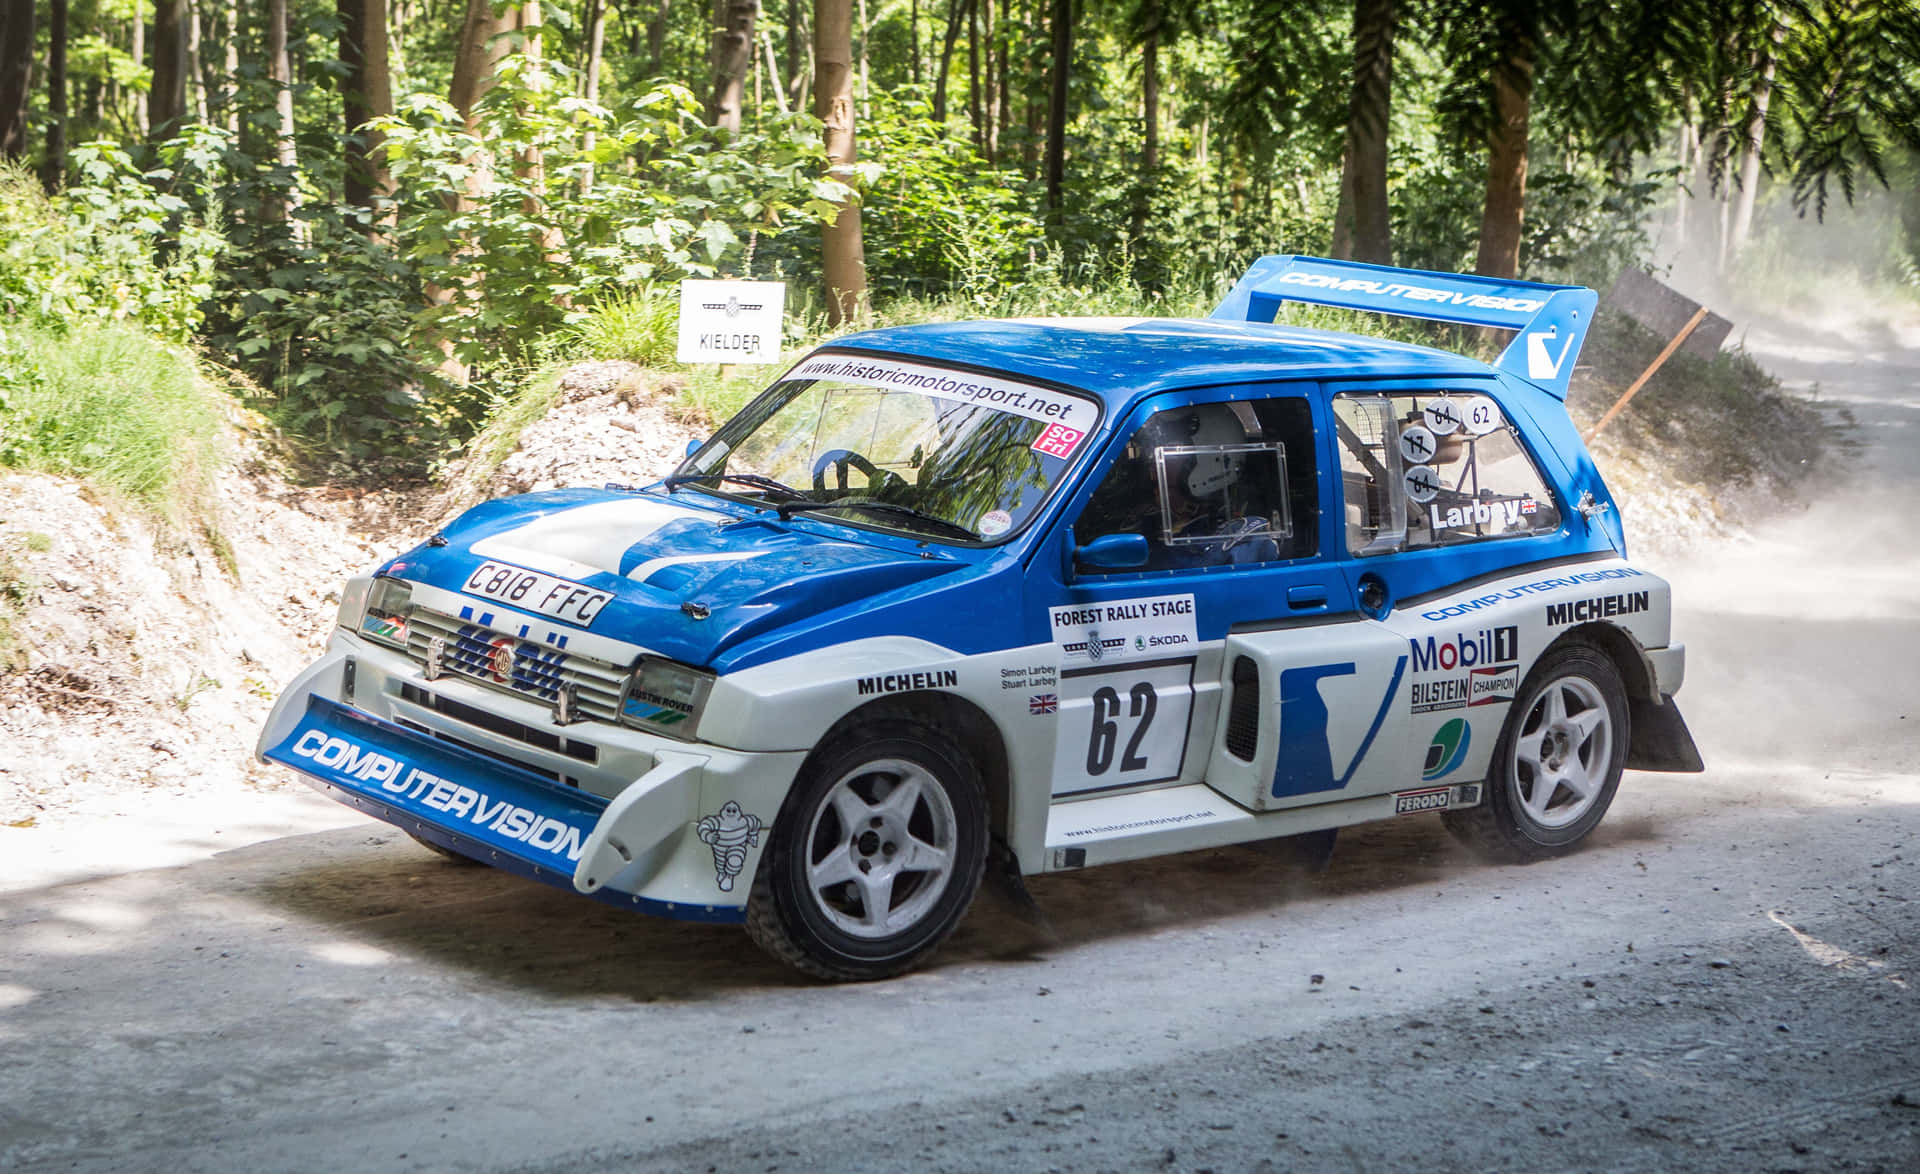 Racing Heritage In Motion - The Powerful Mg Metro 6r4 Wallpaper